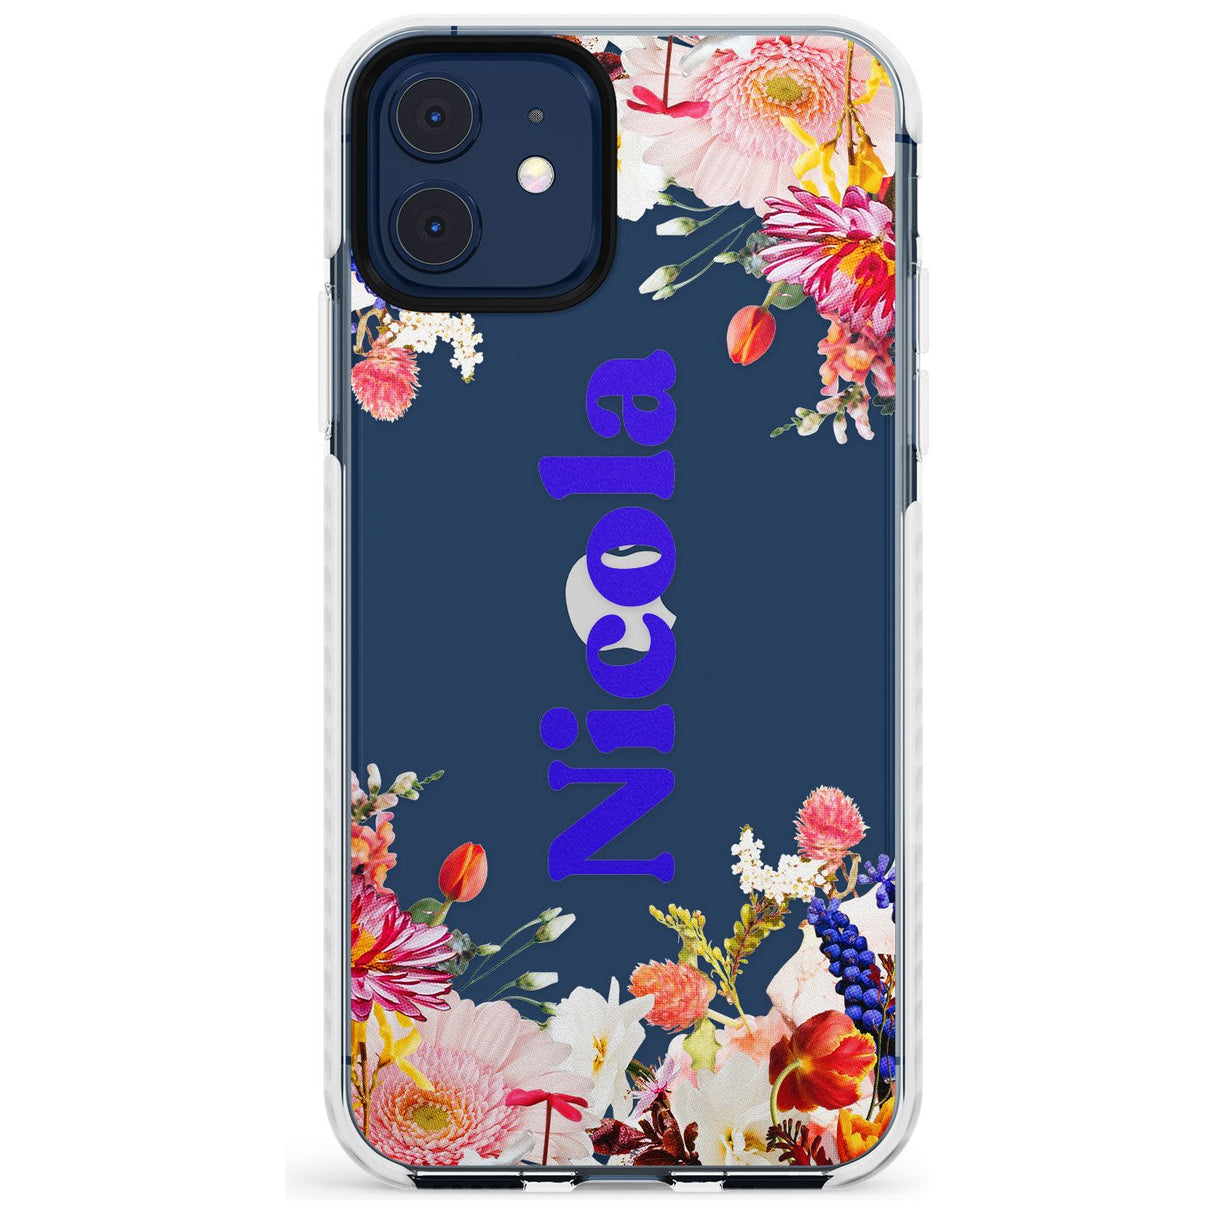 Custom Text with Floral Borders Slim TPU Phone Case for iPhone 11